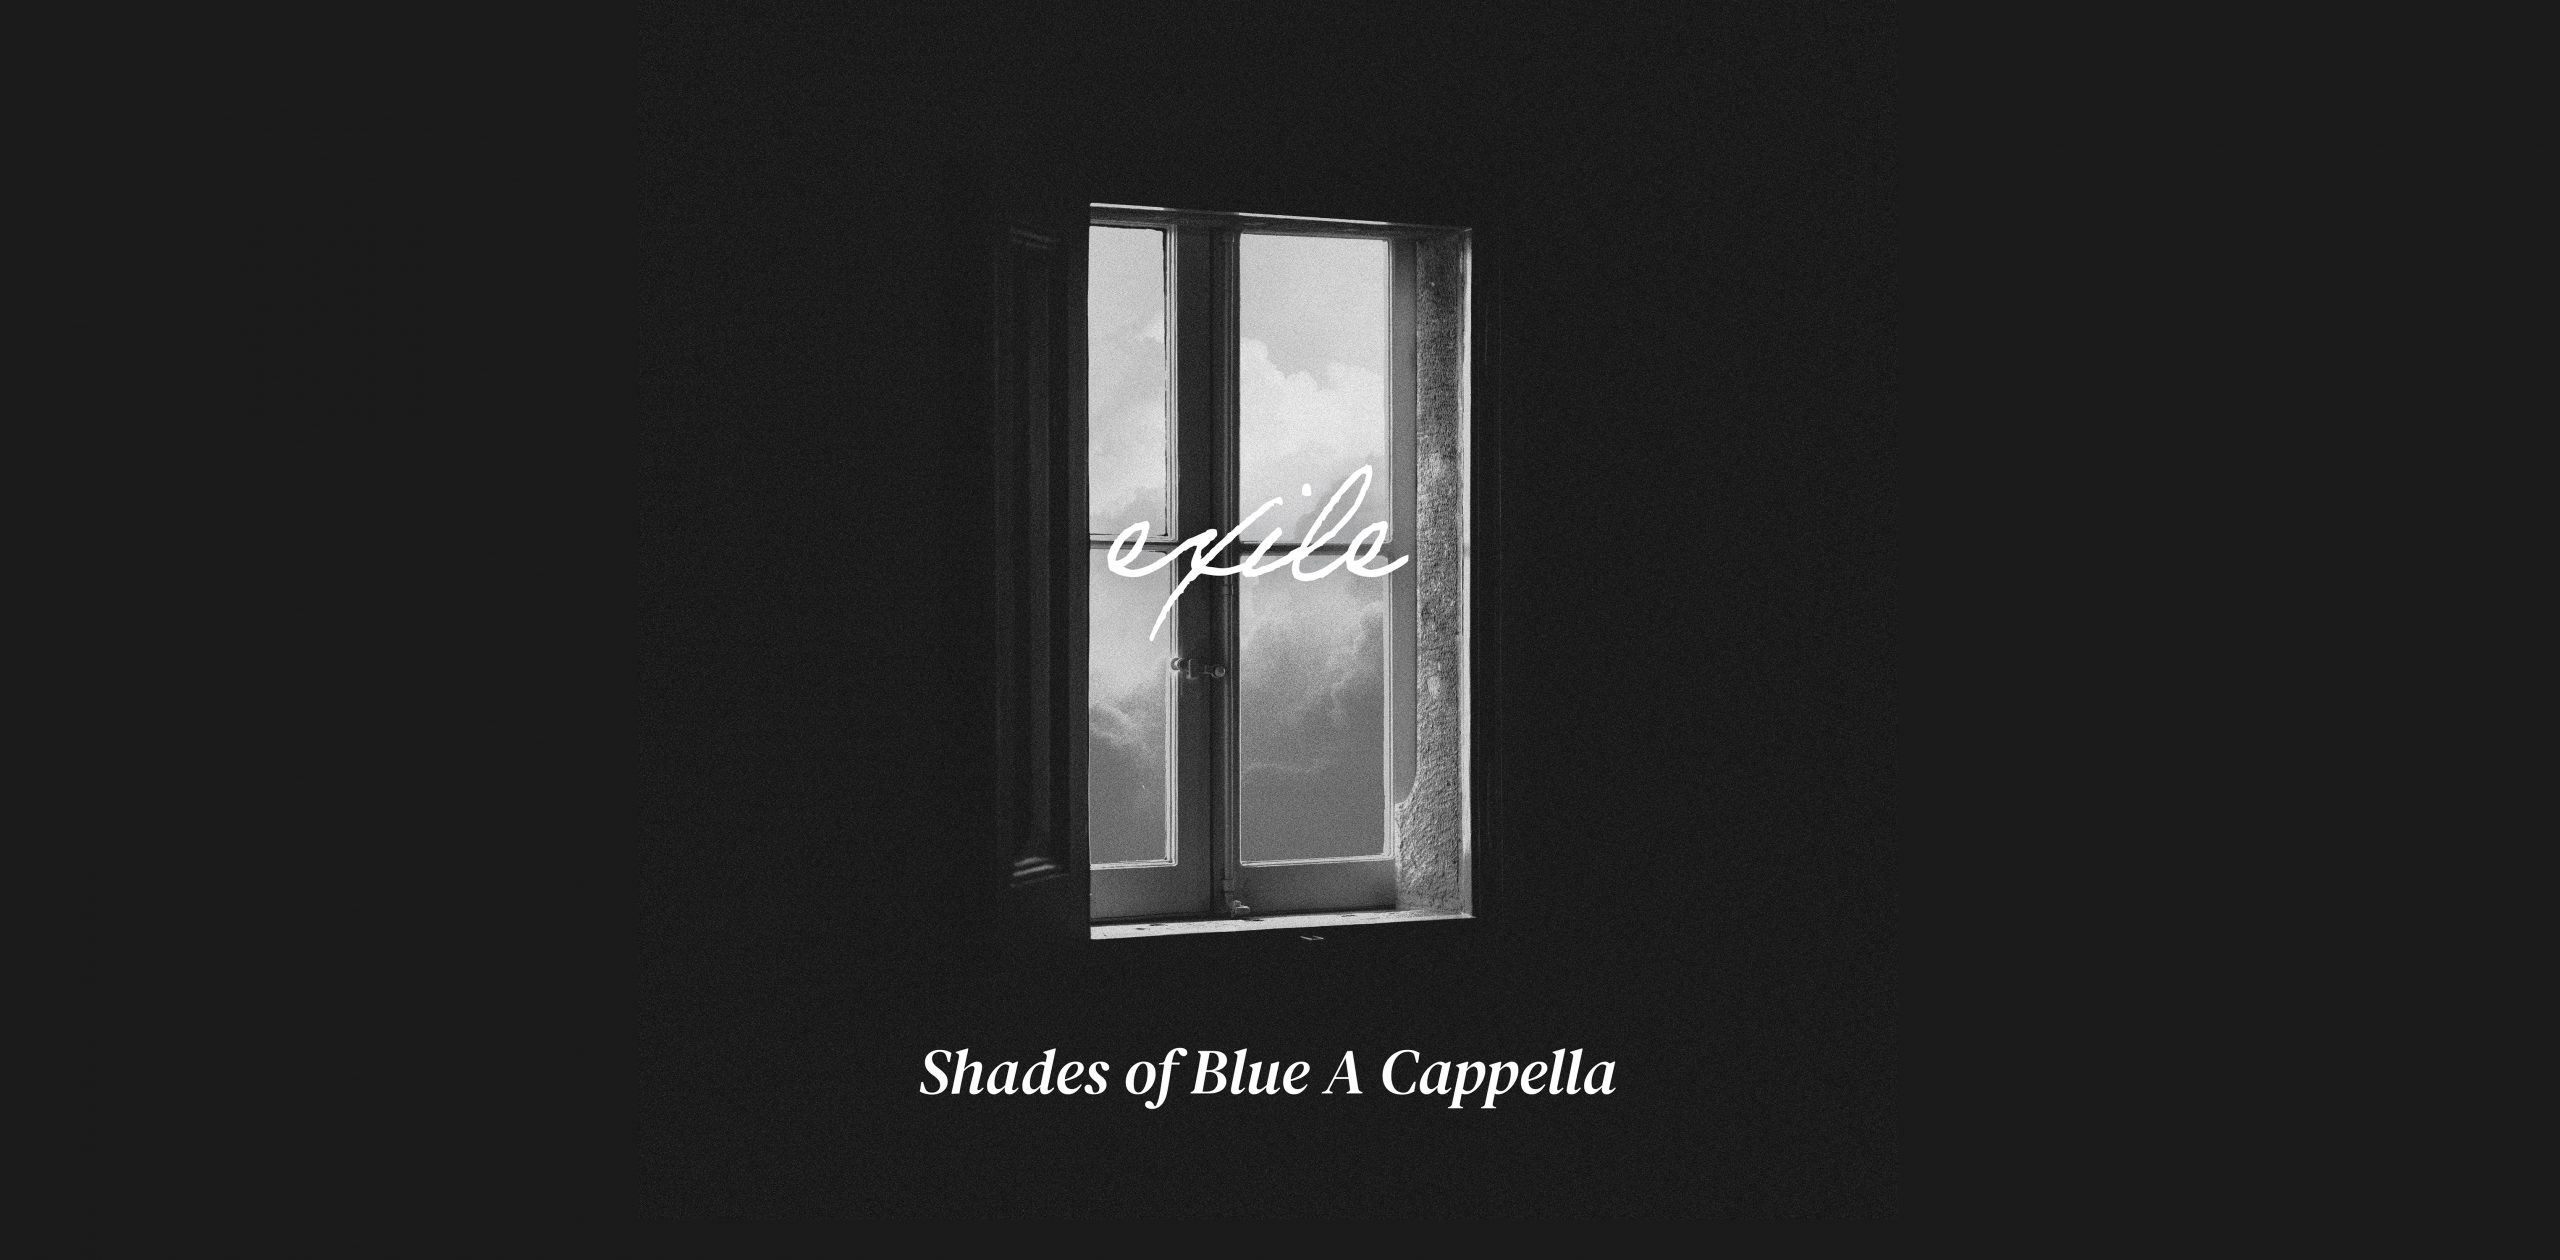 New Release by Shades of Blue